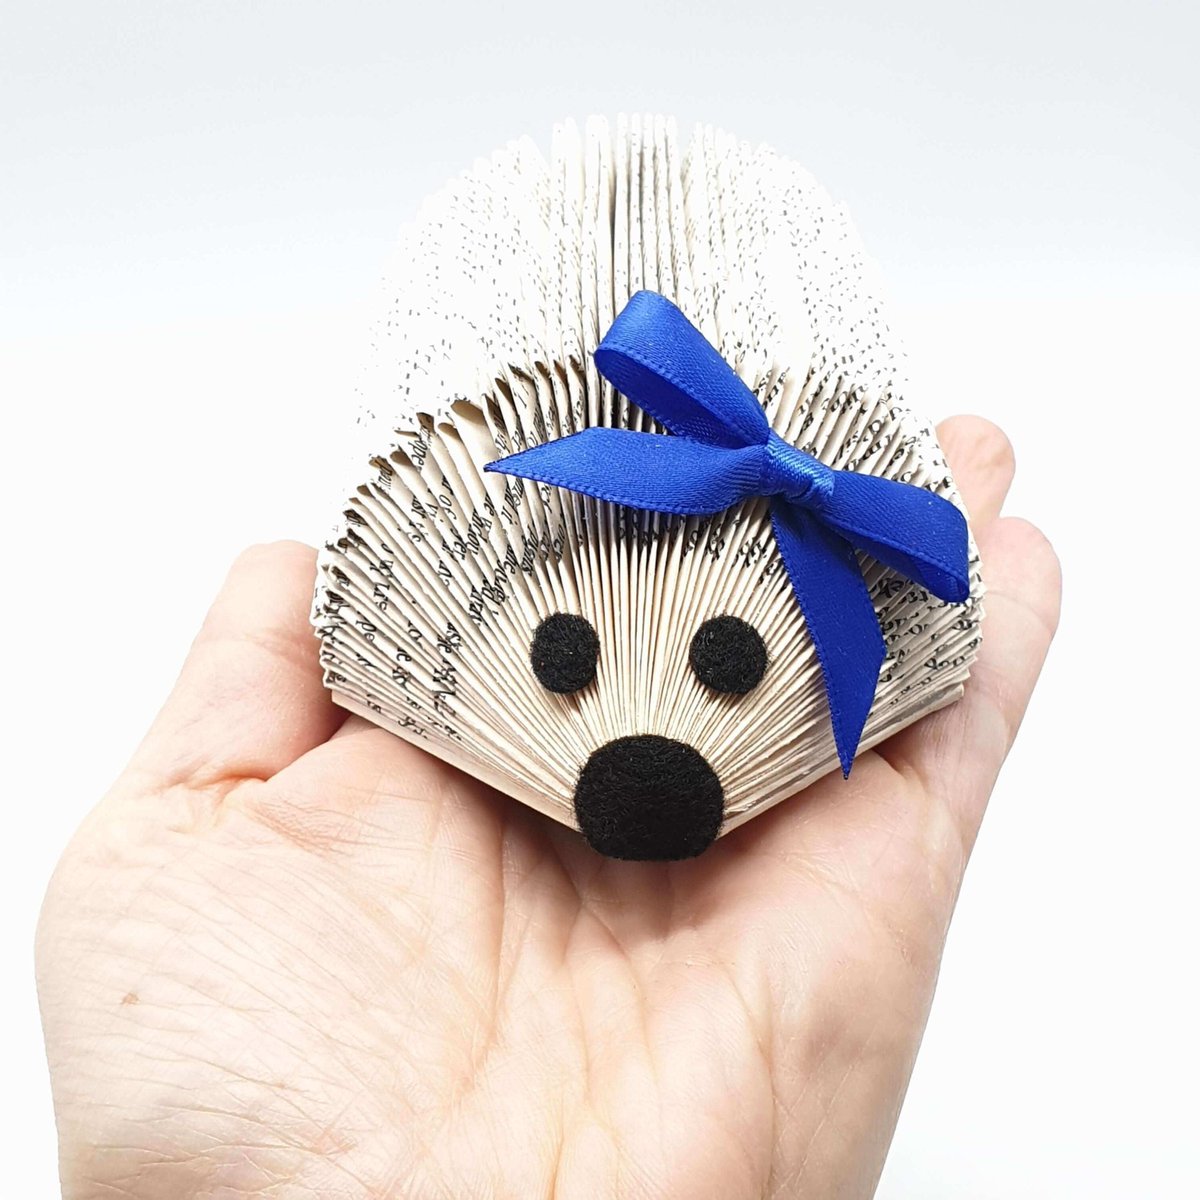 Hedgehog Business Card Holder Book Gift creatoncrafts.com/products/buisn… #Shopify #mhhsbd #CreatonCrafts #DeskBuddy